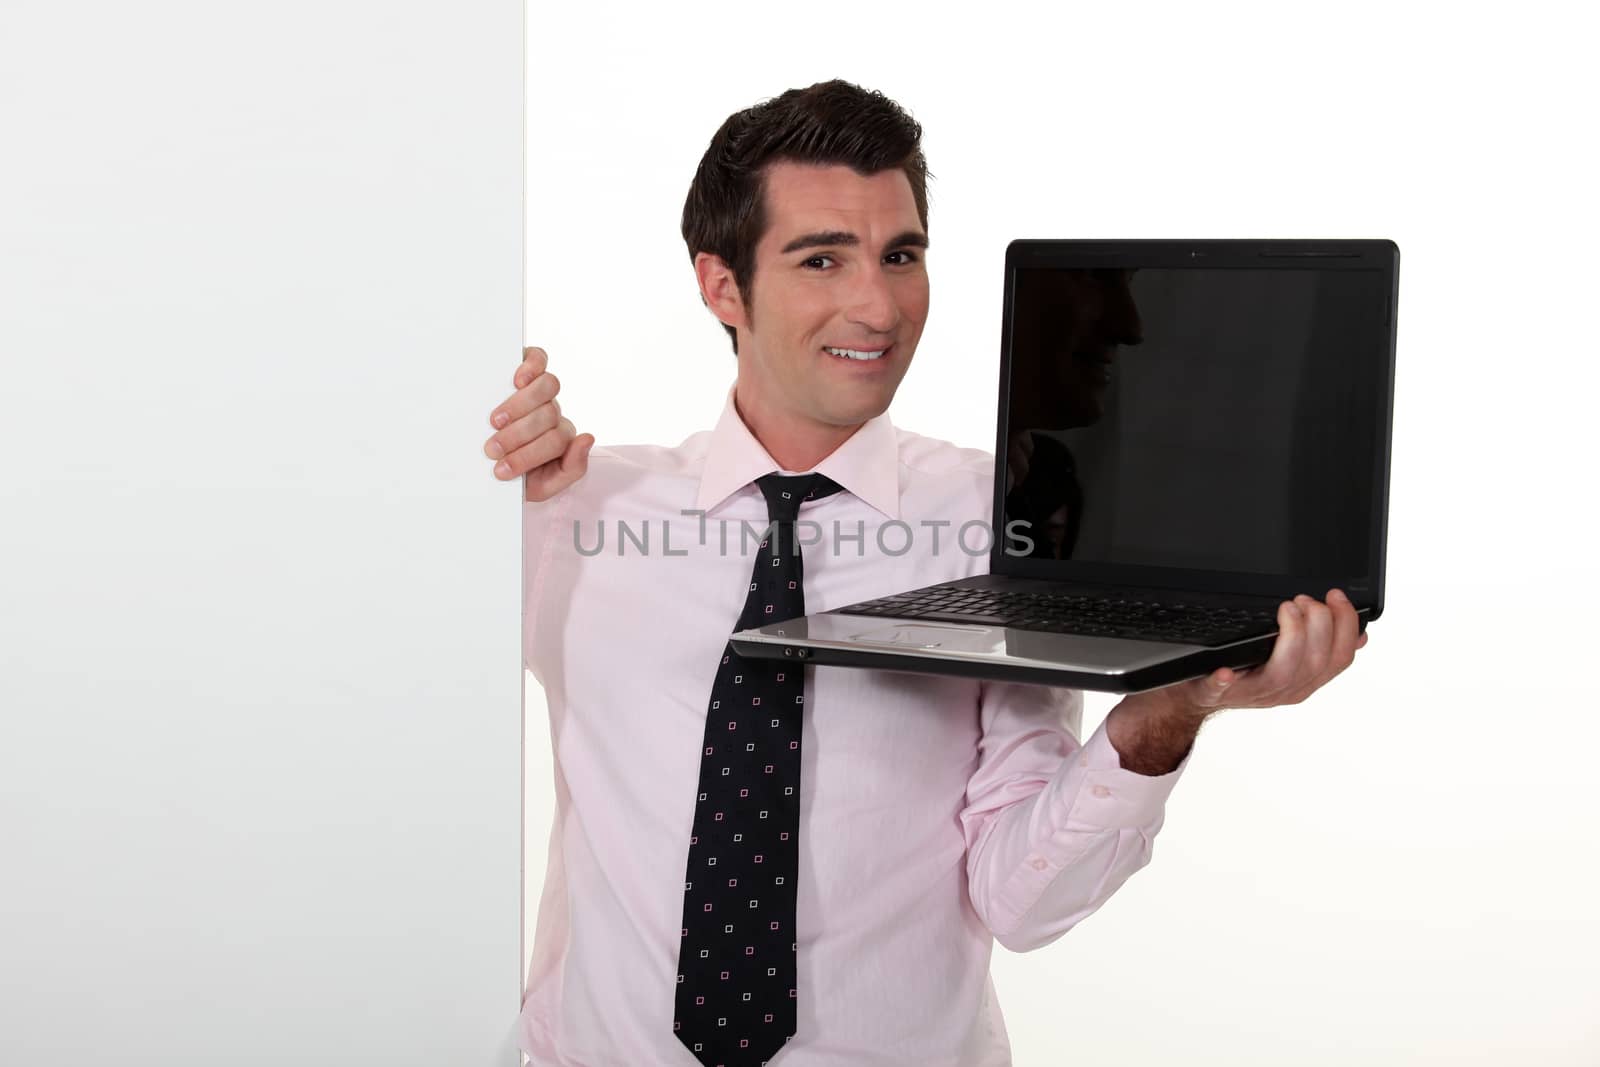 Man in smart suit showing notebook